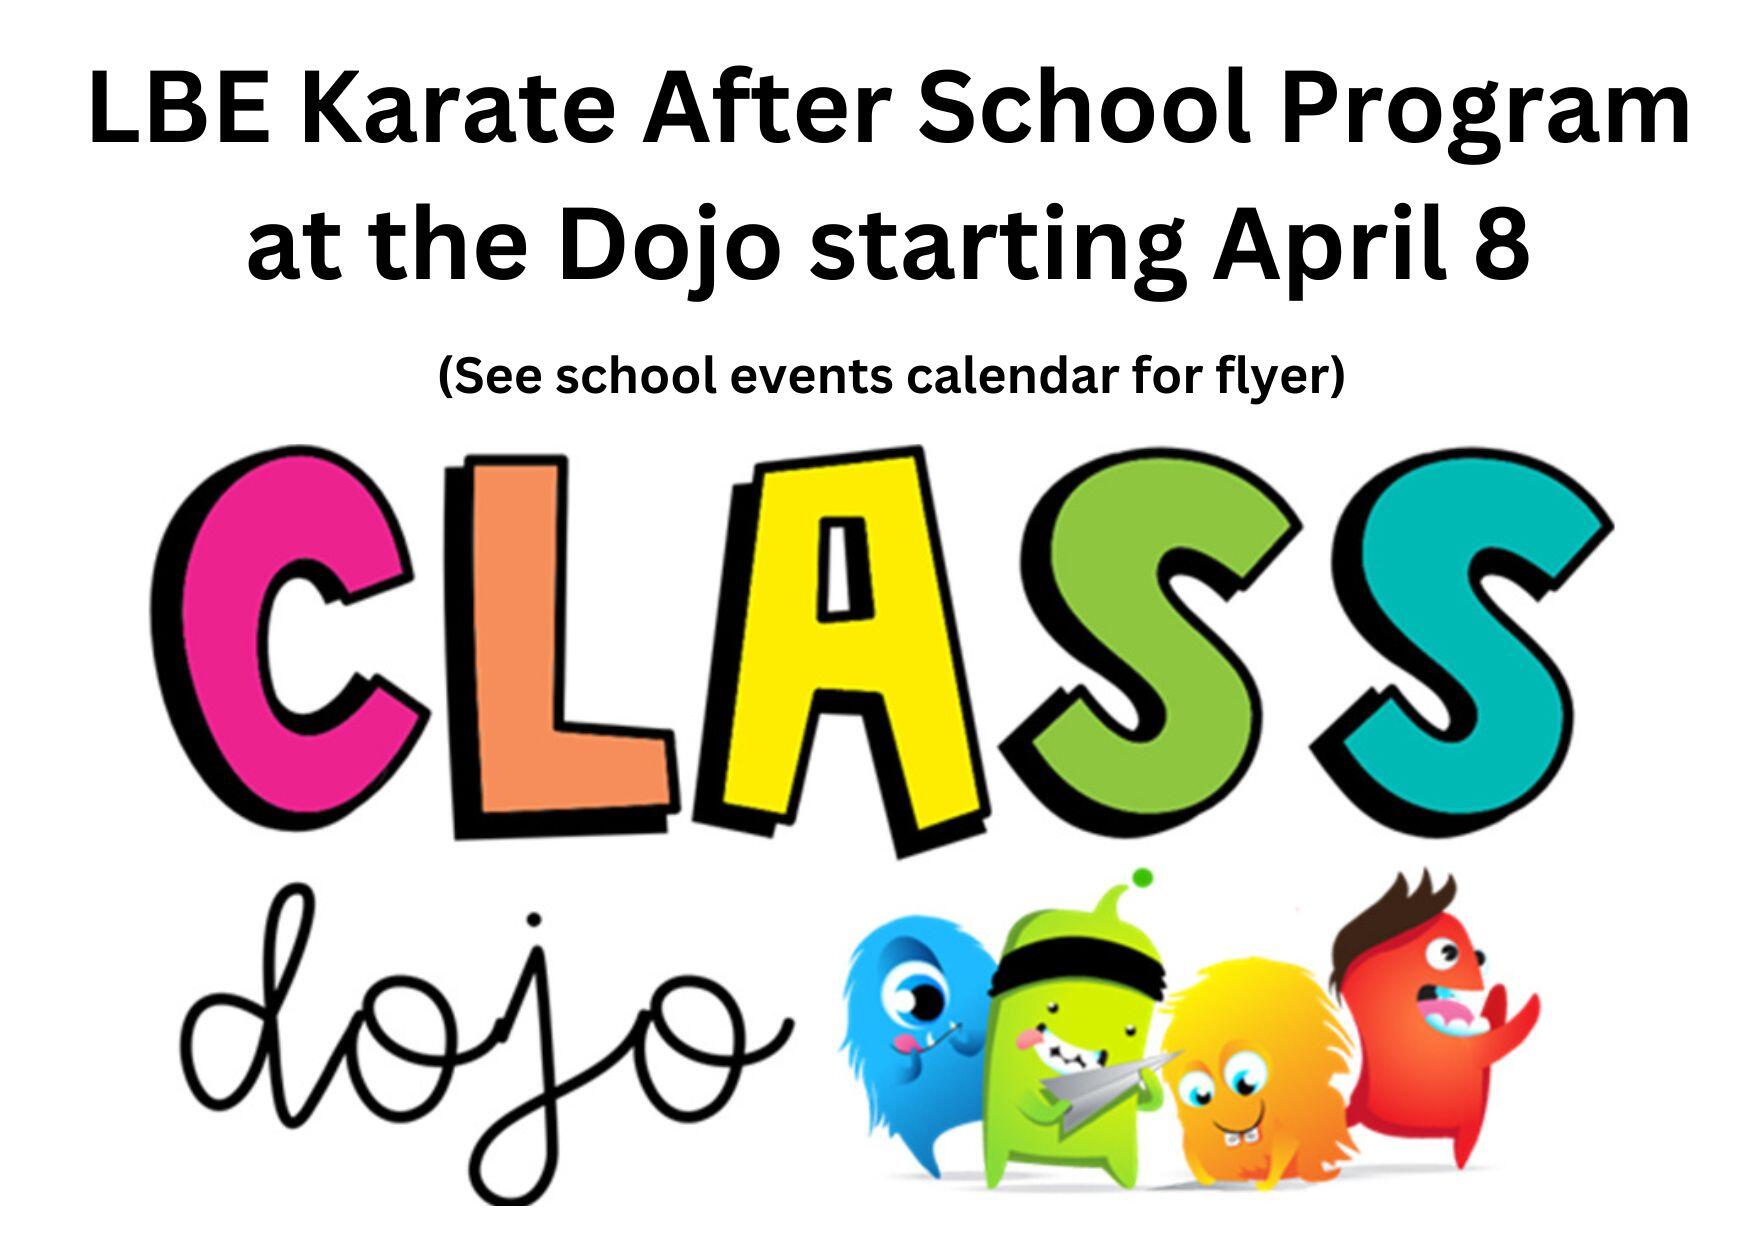 LBE Karate After School Program at the Andrello Dojo